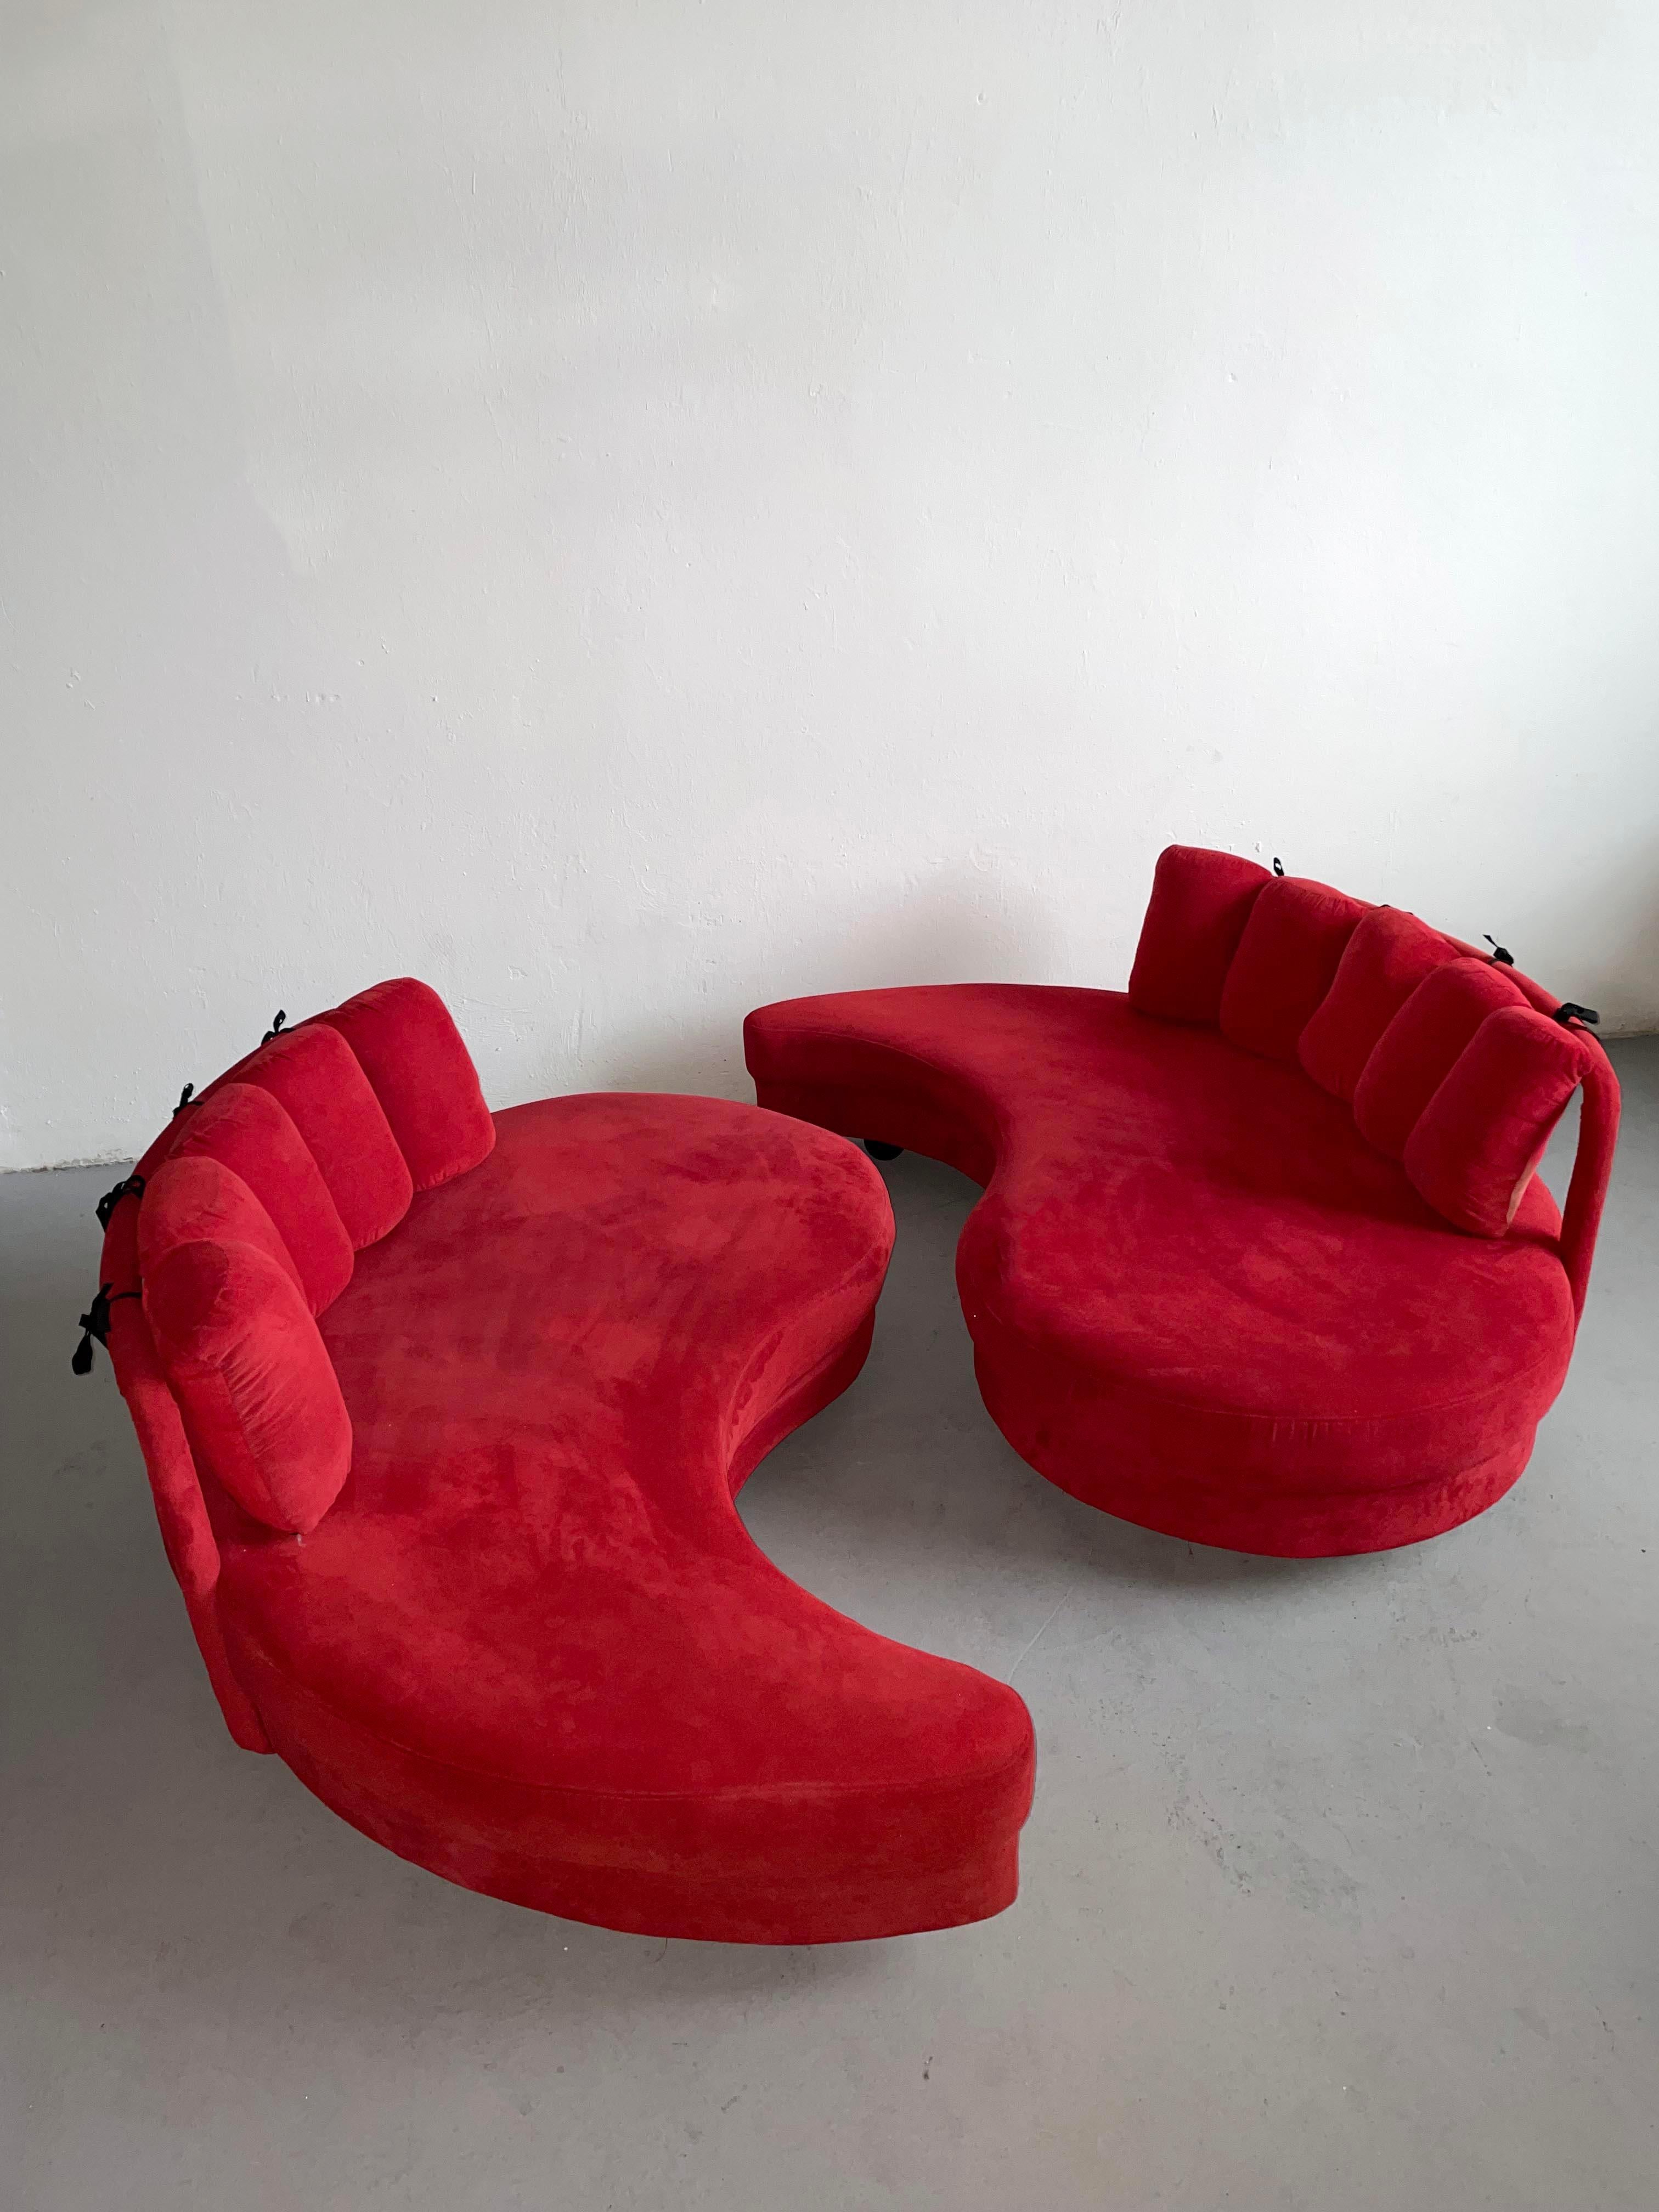 Set of 2 Postmodern Curved Yin-Yang Shaped Sofa Daybeds in Red Fabric, c 1980s For Sale 8